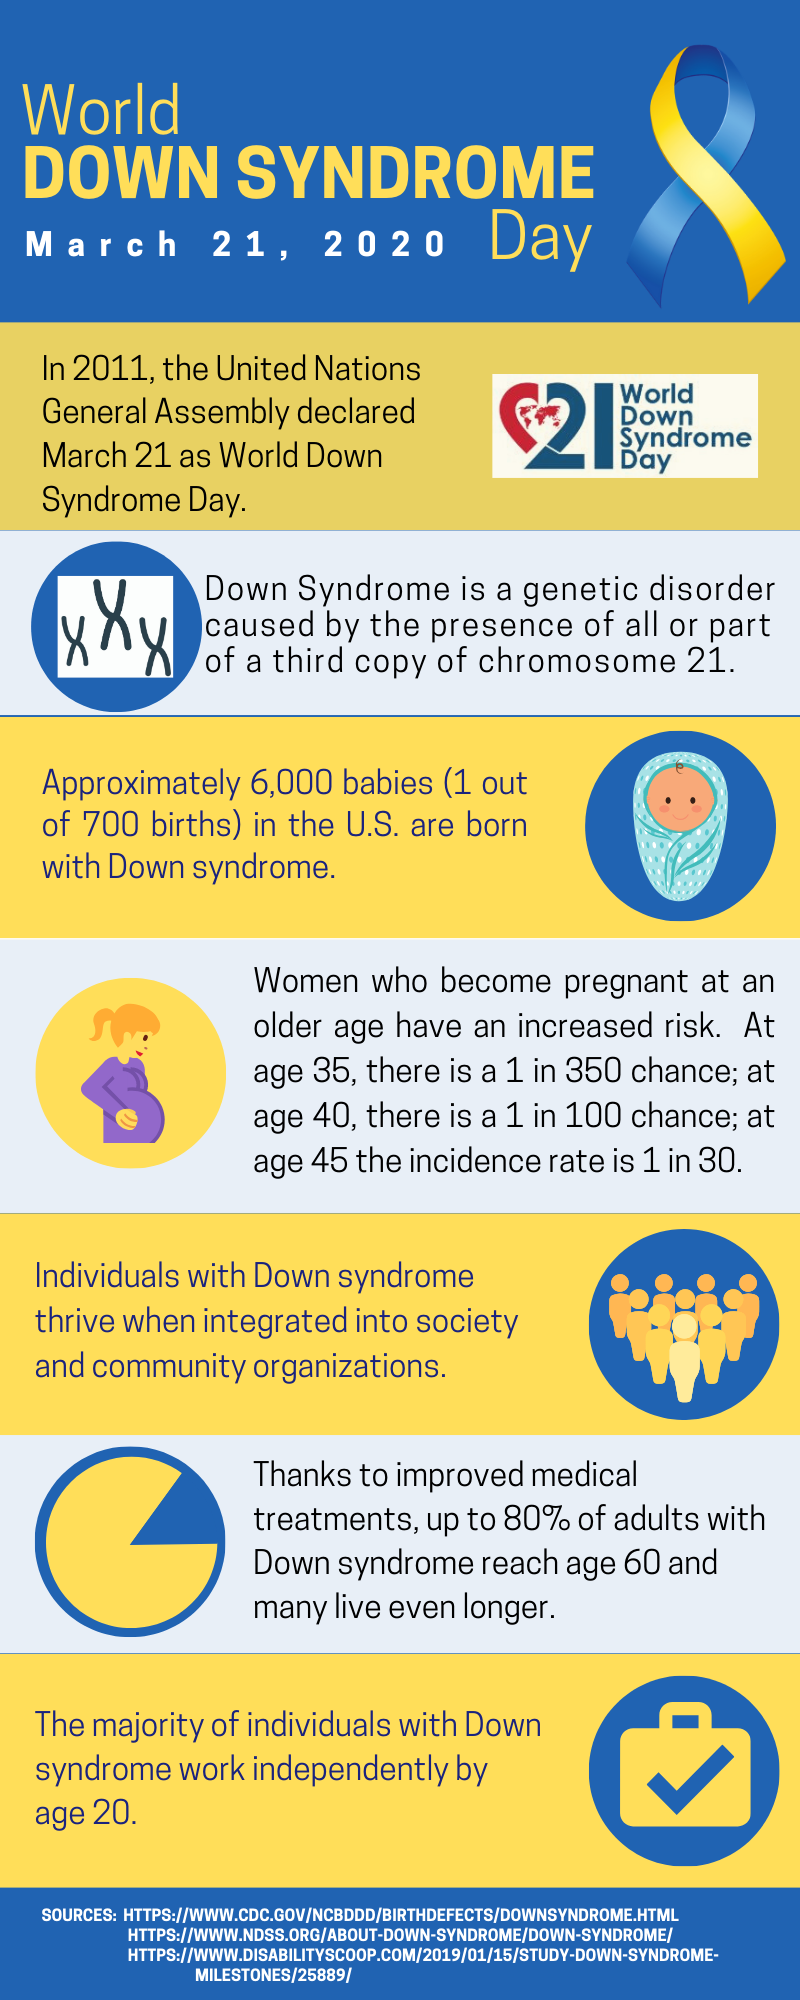 Facts and figures about World Down Syndrome Day 2020